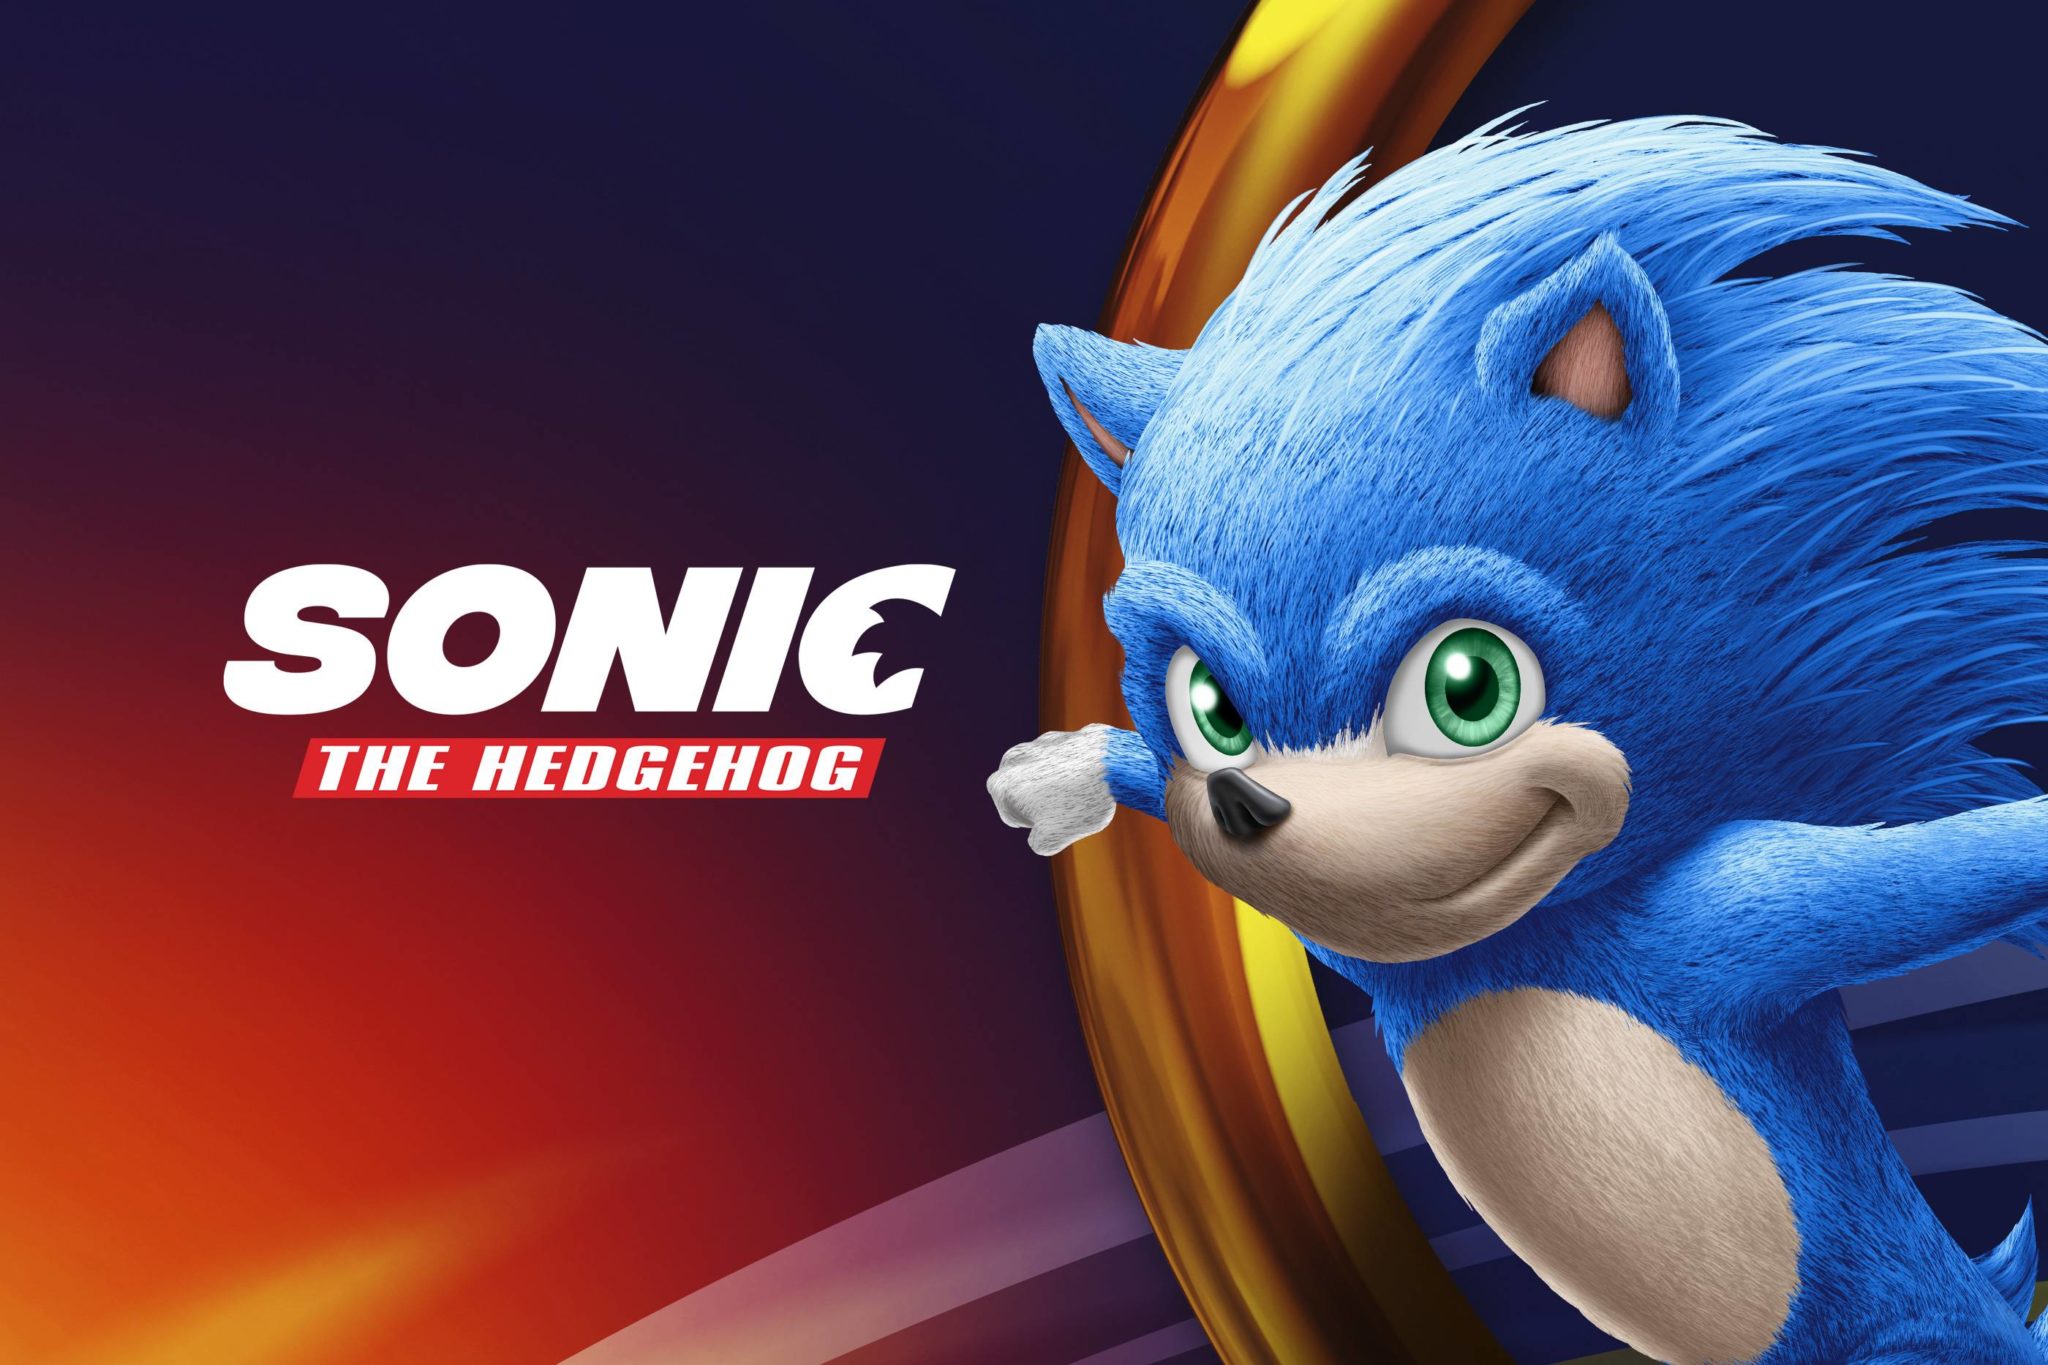 RUMOR - Leaked Sonic the Hedgehog movie info shows who Paramount